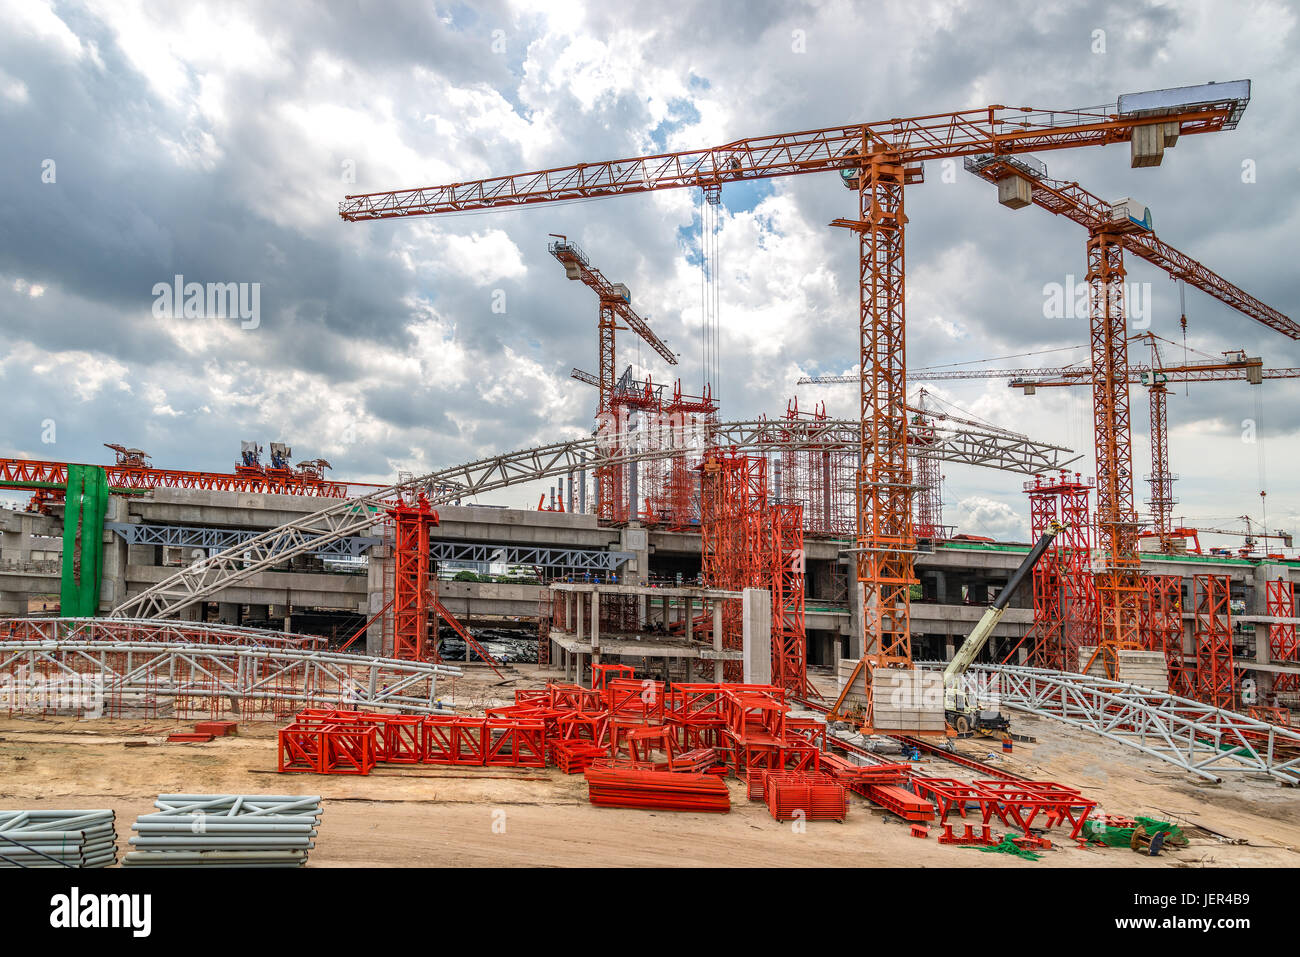 Cranes Working on Expressway Construction Sites in Asia Stock Photo